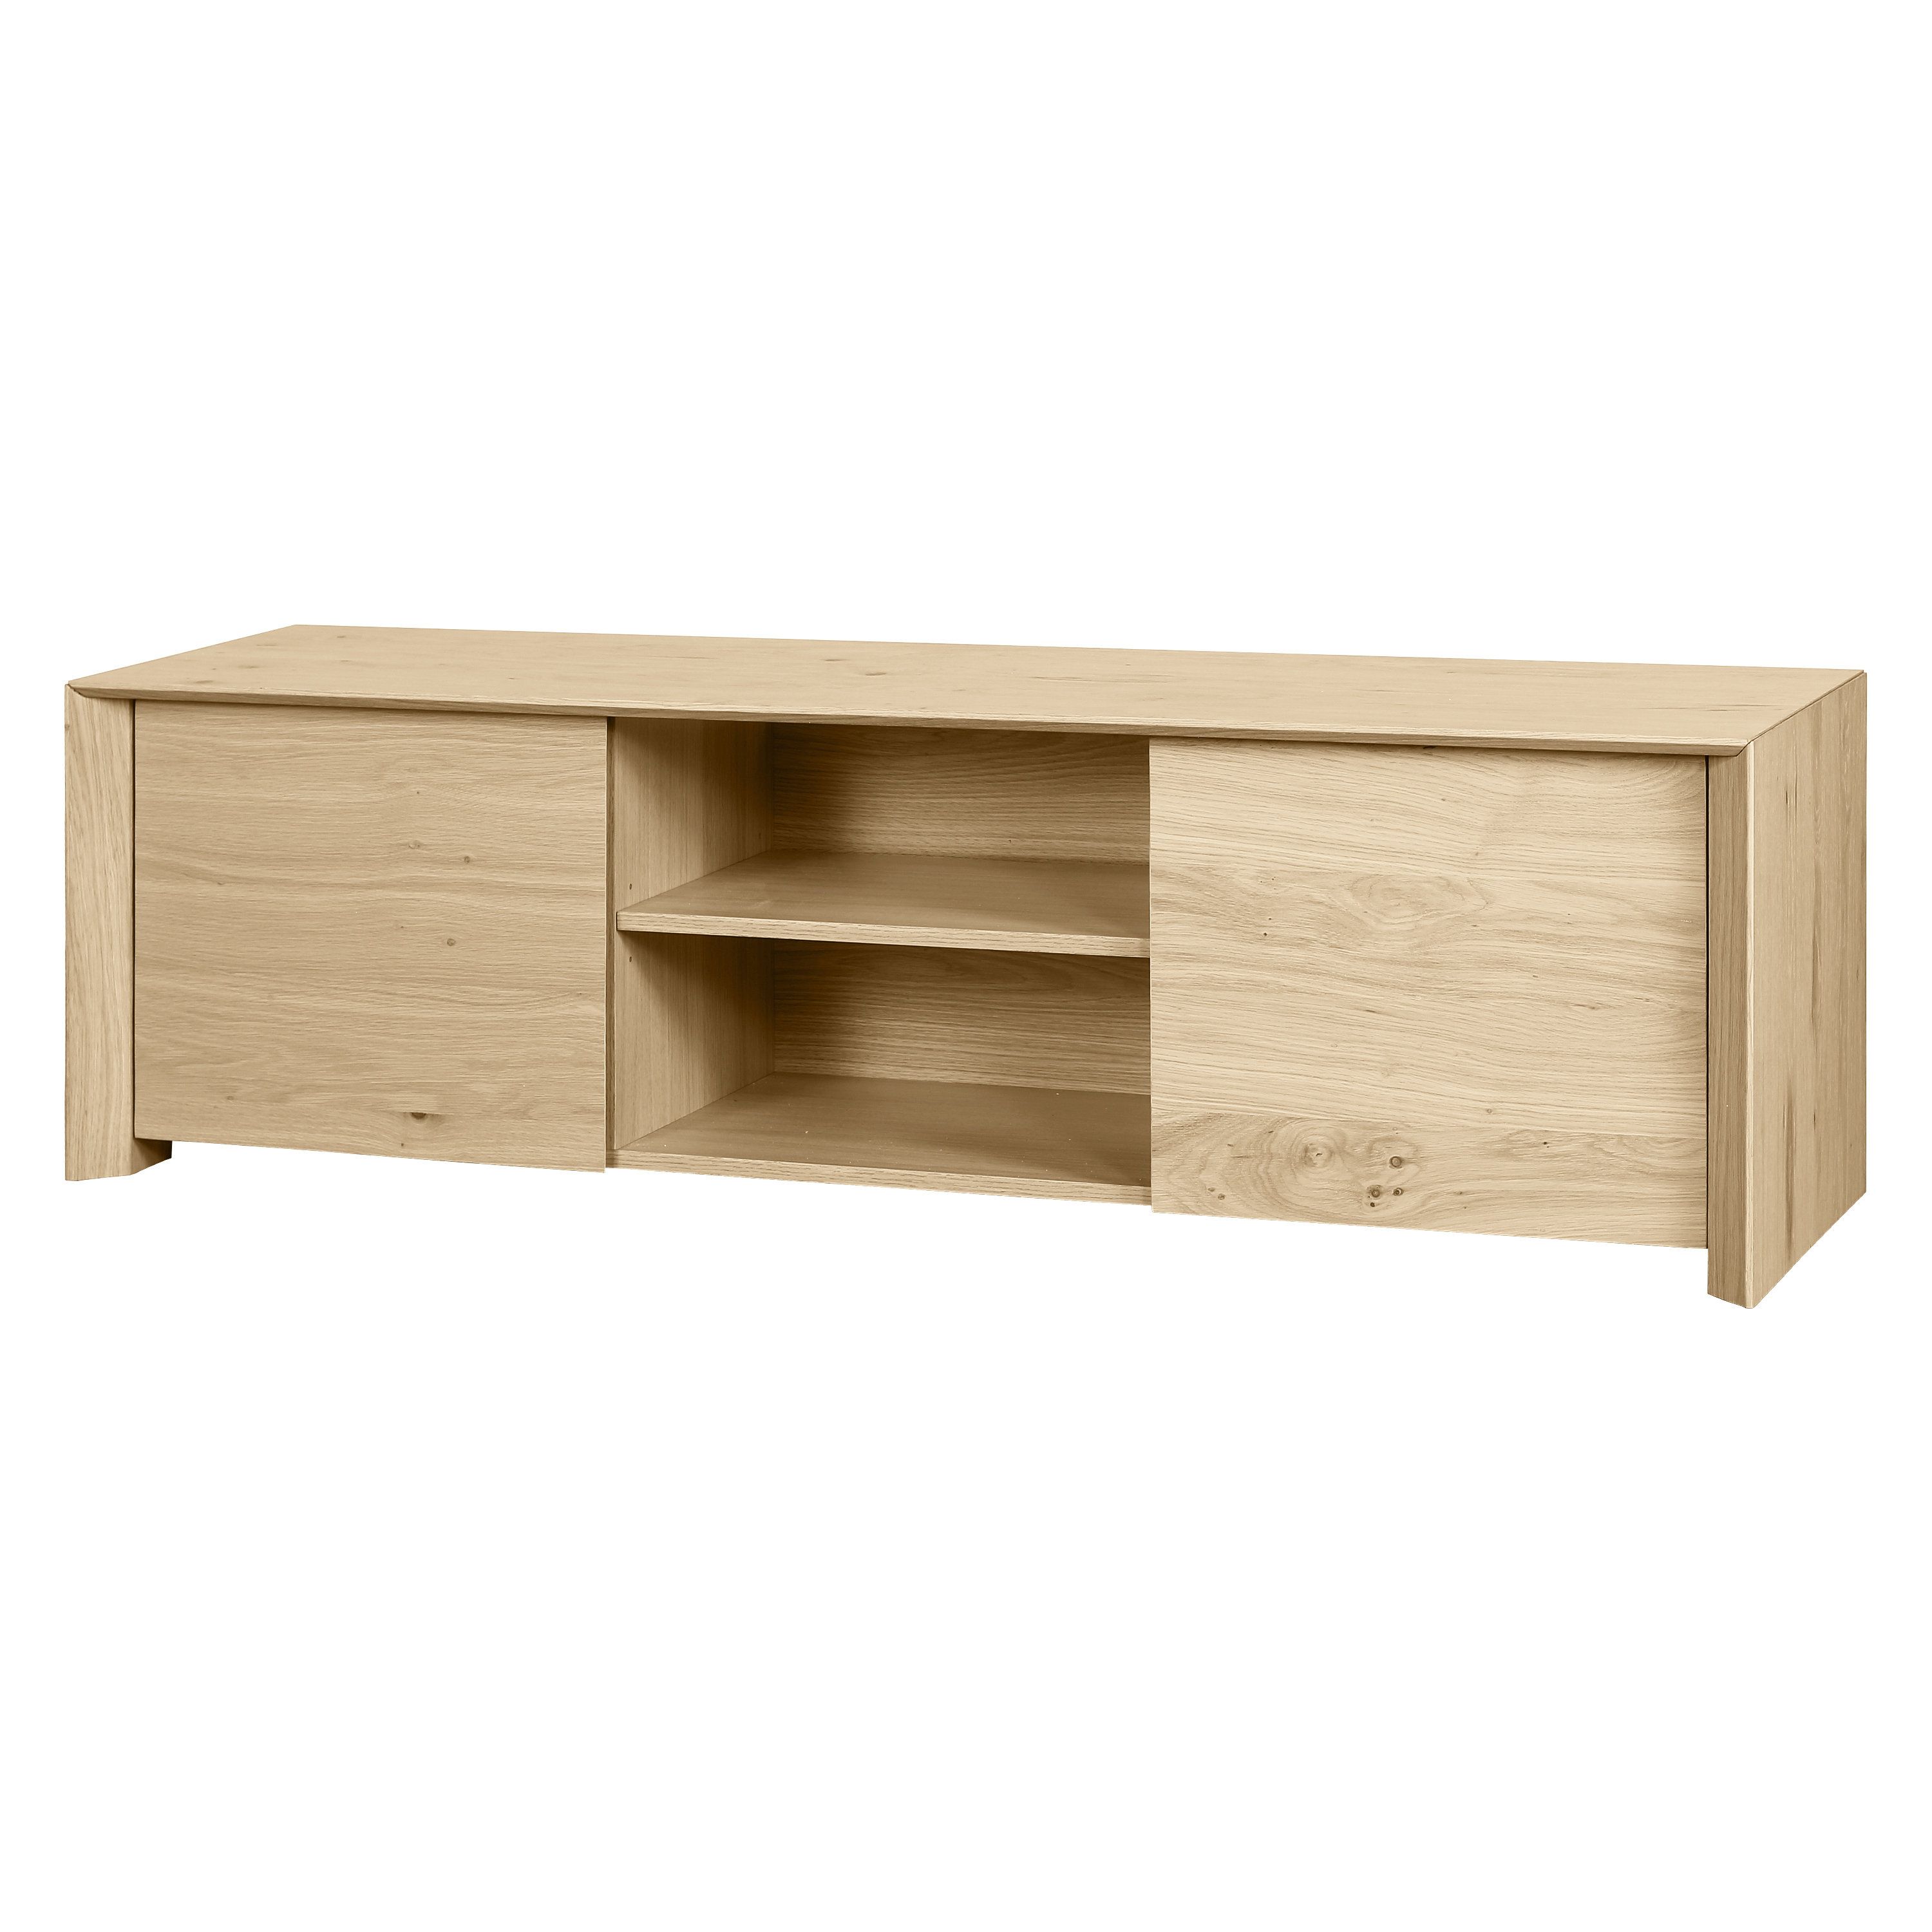 Sonoma Oak Tv Stand | Wayfair.co (View 5 of 20)